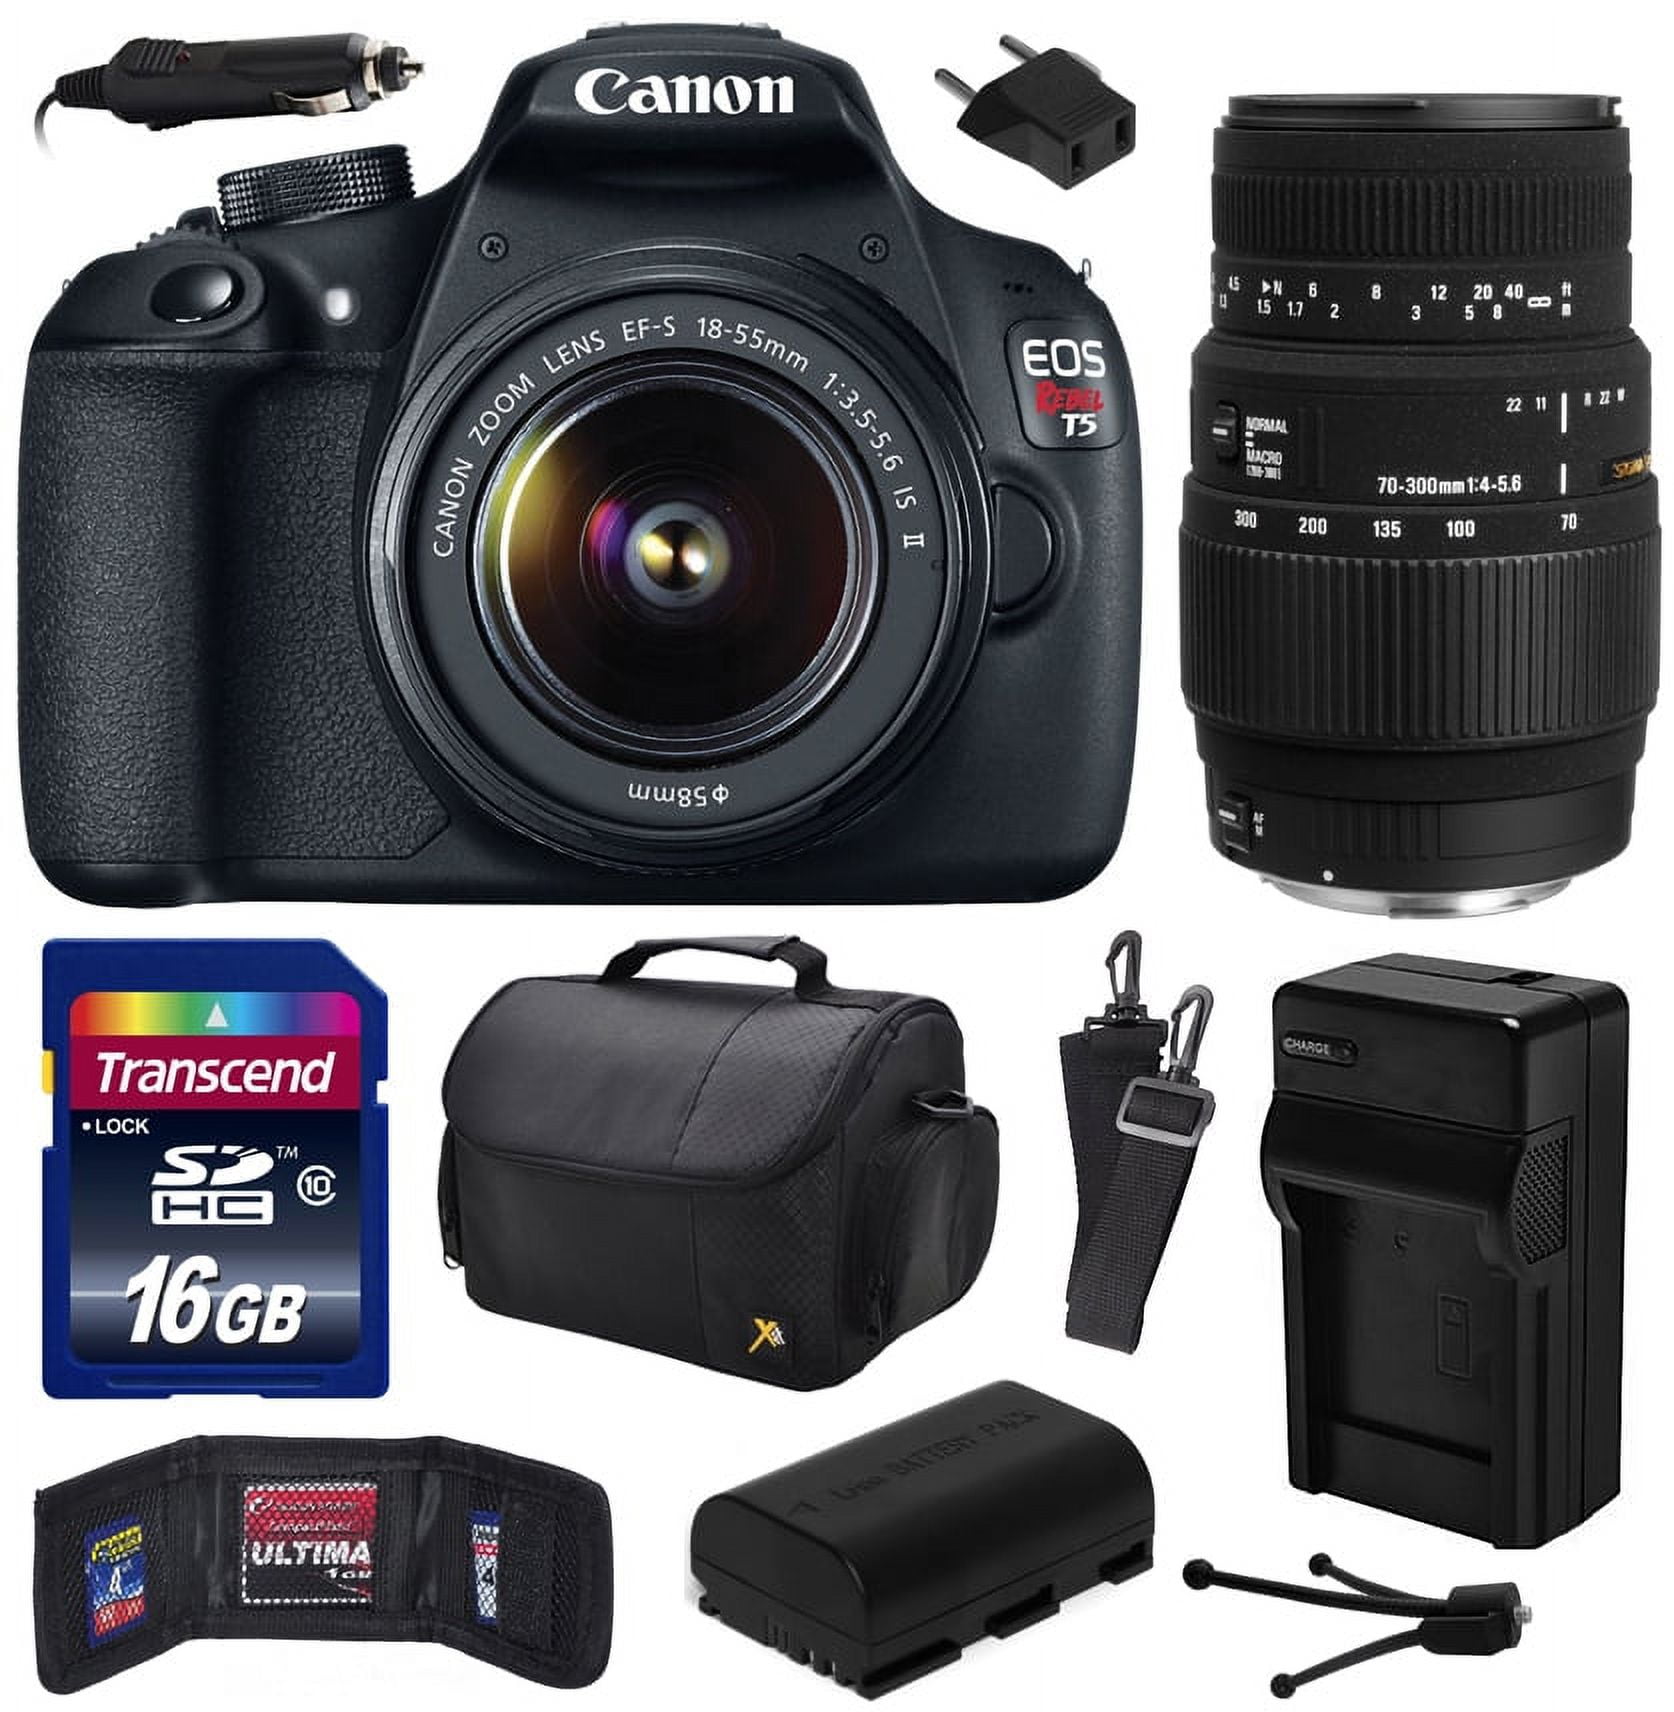 Canon EOS Rebel T5 Digital SLR Camera with EF-S 18-55mm IS II and Sigma  70-300mm f/4-5.6 DG Macro Lens with 16GB Memory, Large Case, Extra Battery, 